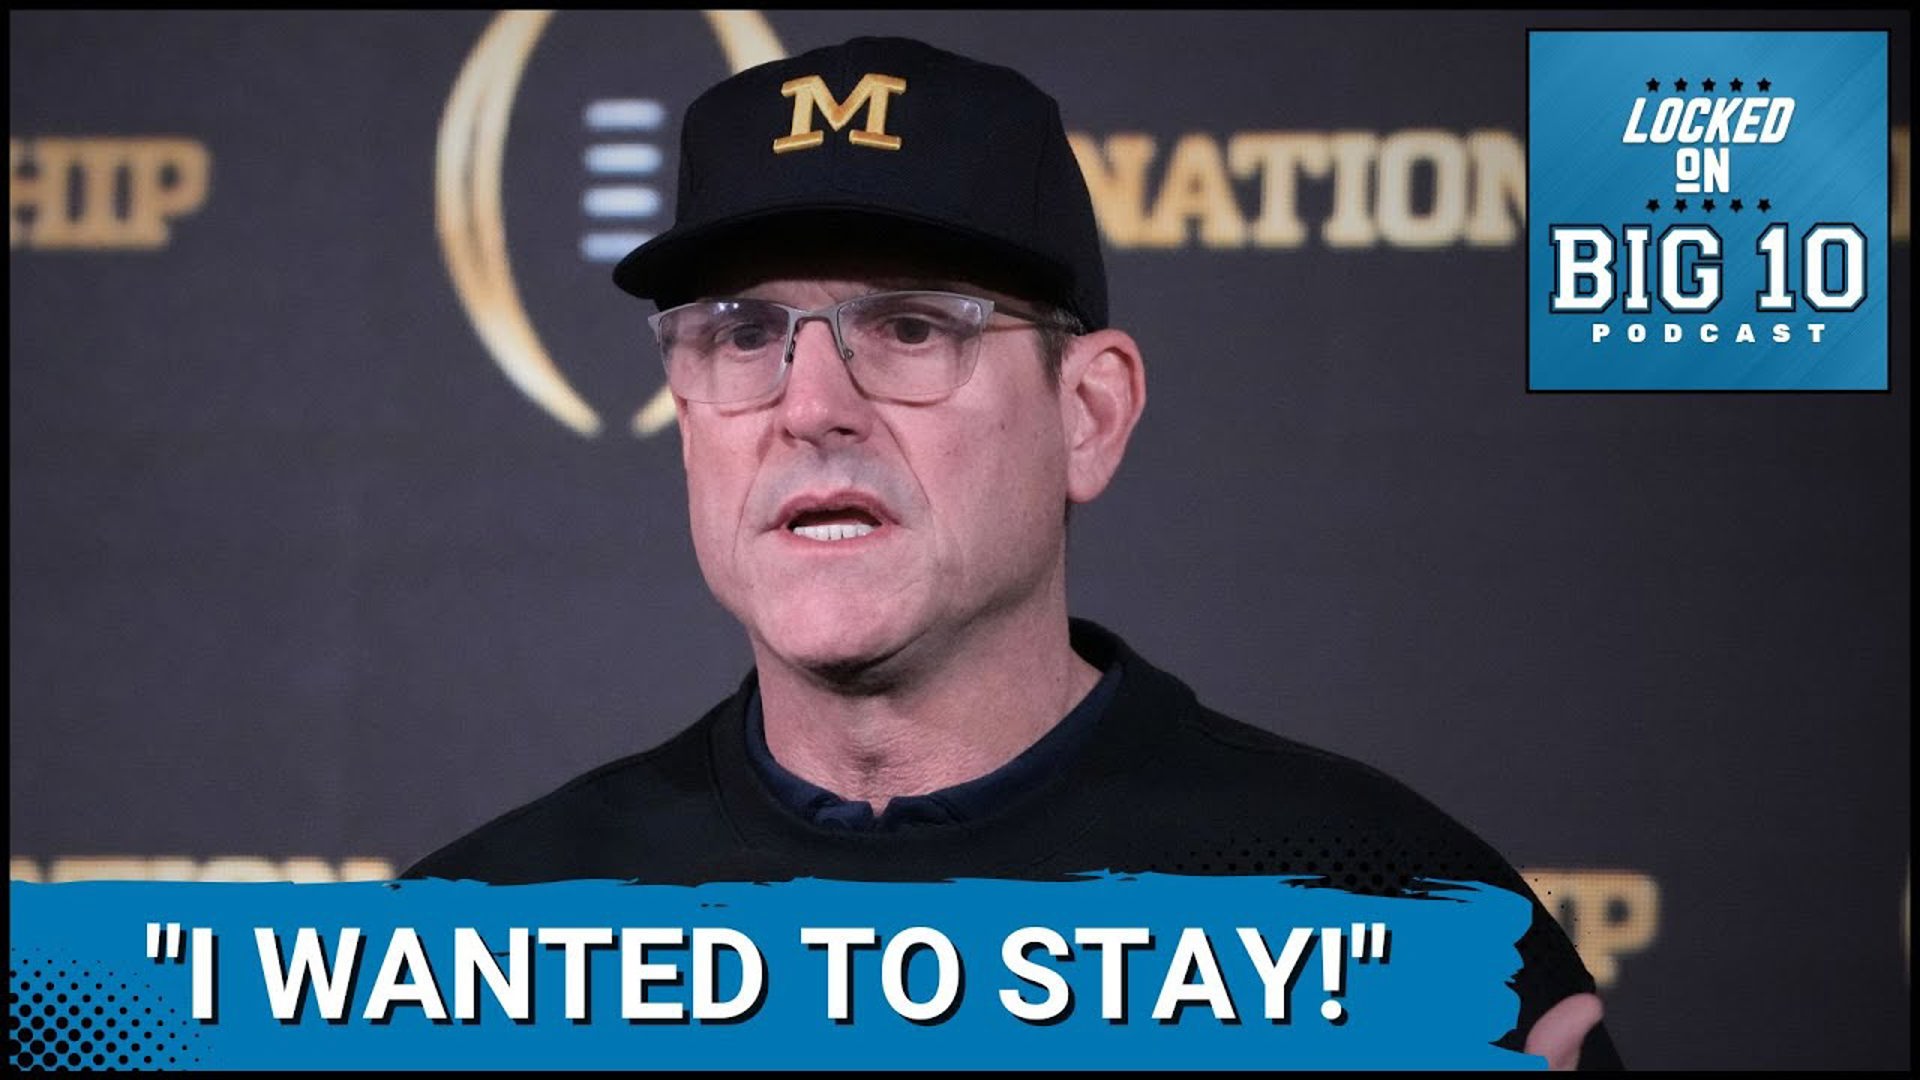 Former Michigan football coach Jim Harbaugh really wanted to stay at Michigan according to a brand new book about him.